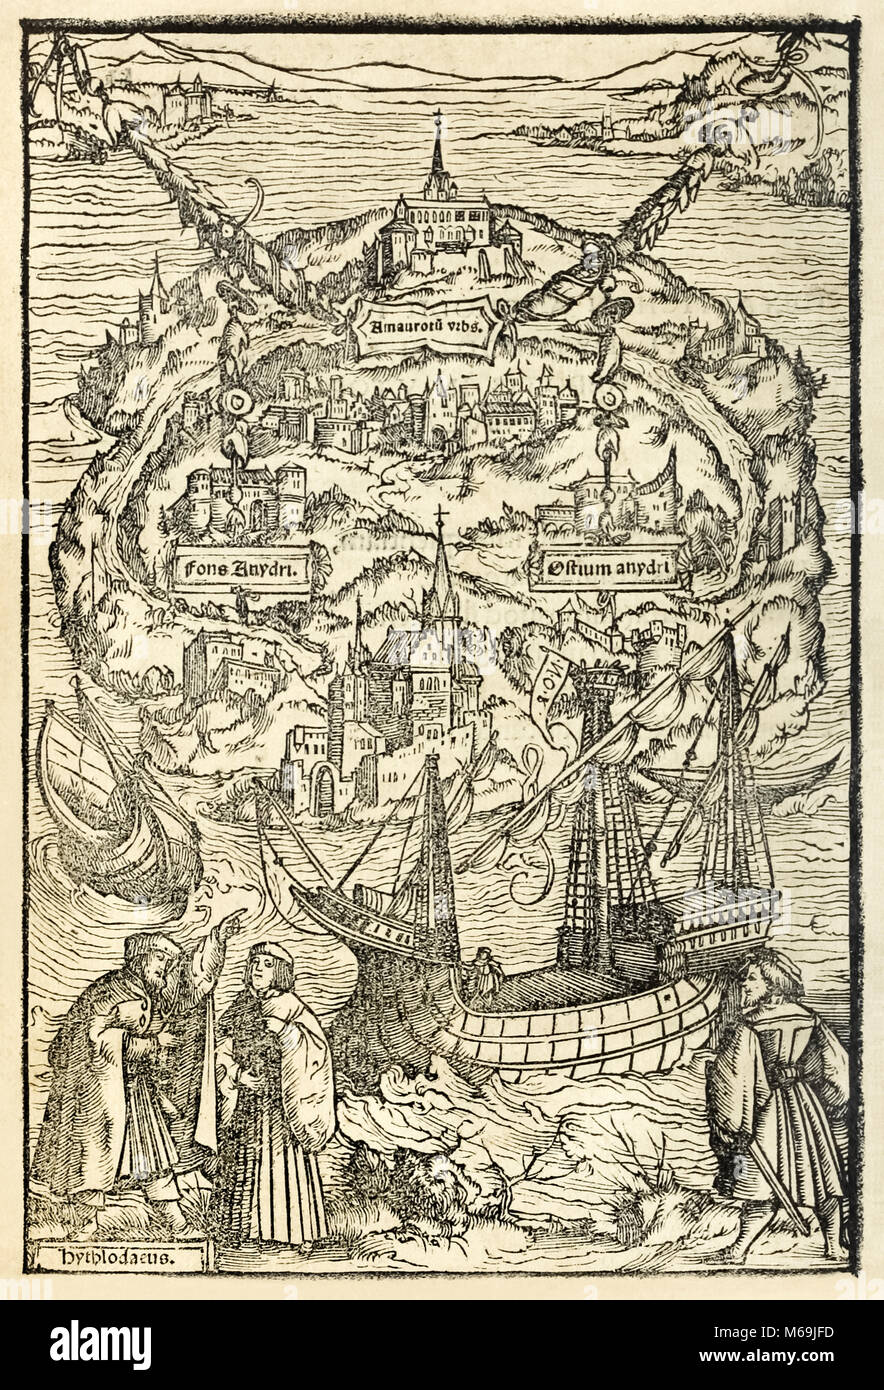 Map of the New Island of Utopia from a 1518 edition of ‘Utopia’ by Sir Thomas More (1478–1535), first published in 1516. Woodcut by Ambrosius Holbein (c. 1494-c. 1519) showing the island with protagonist  Raphael Hythloday bottom left describing the ideal society found on the island. See more information below. Stock Photo